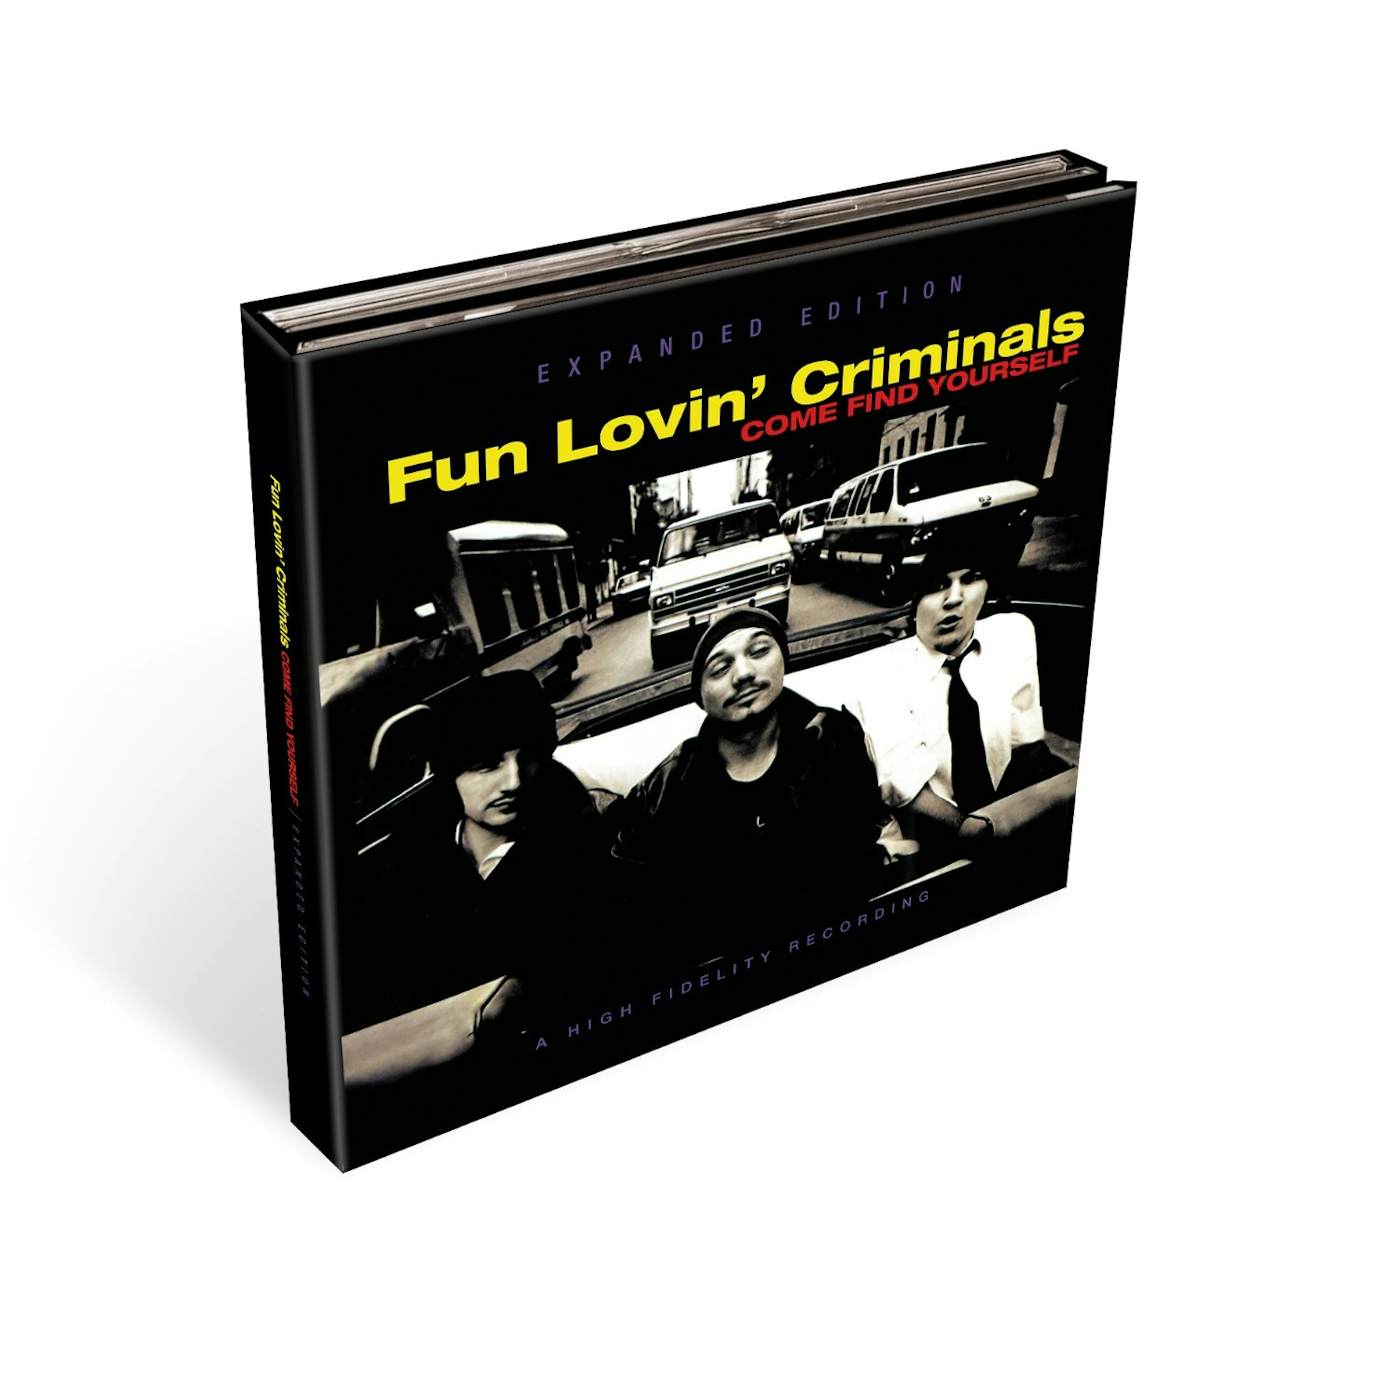 Fun Lovin' Criminals COME FIND YOURSELF: 20TH ANNIVERSARY EXPANDED CD